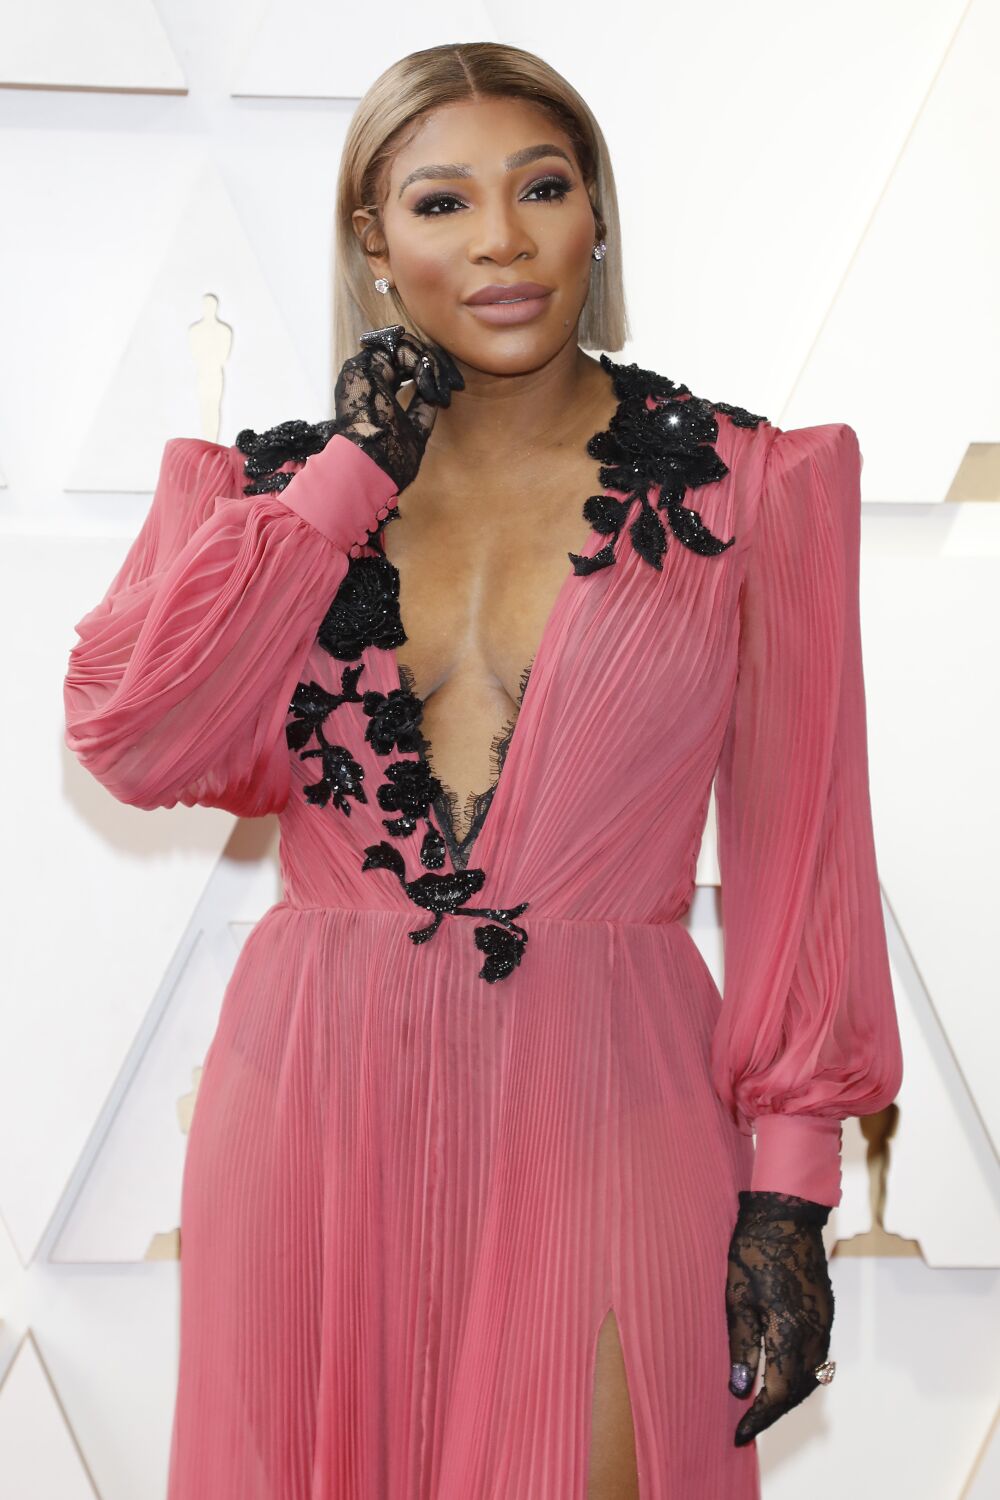 Serena Williams finally addresses Will Smith's Oscars slap: 'We're all imperfect'